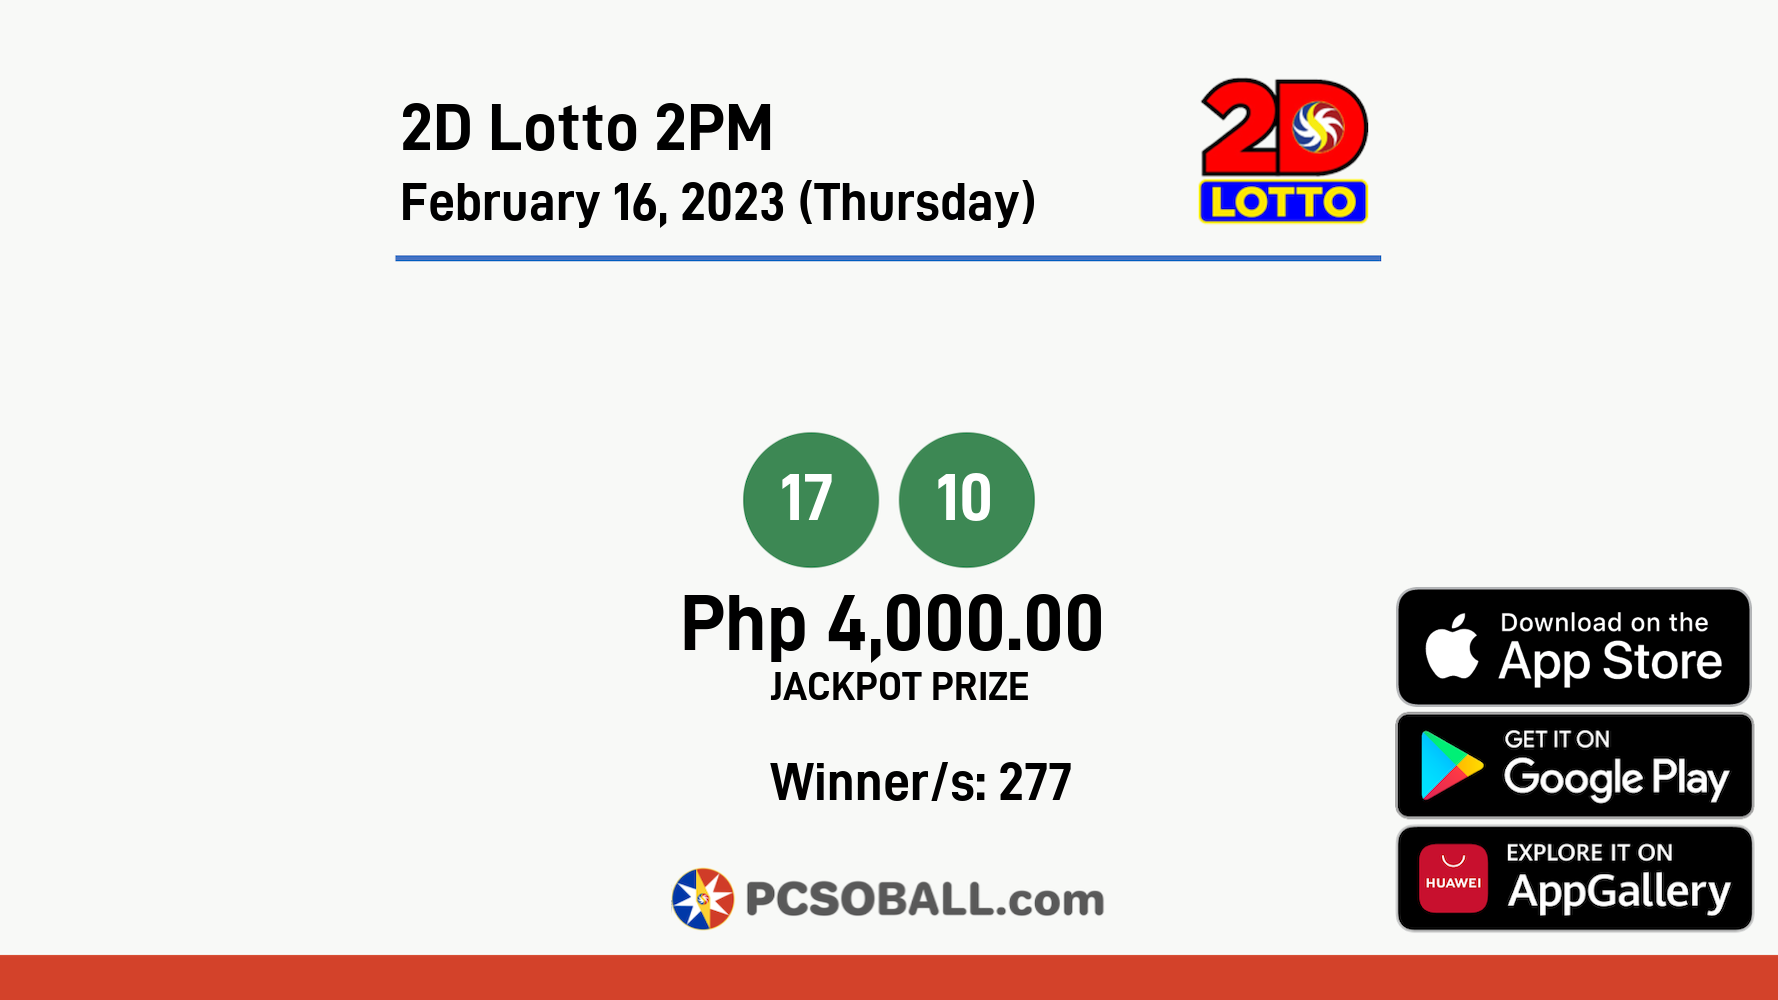 2D Lotto 2PM February 16, 2023 (Thursday) Result